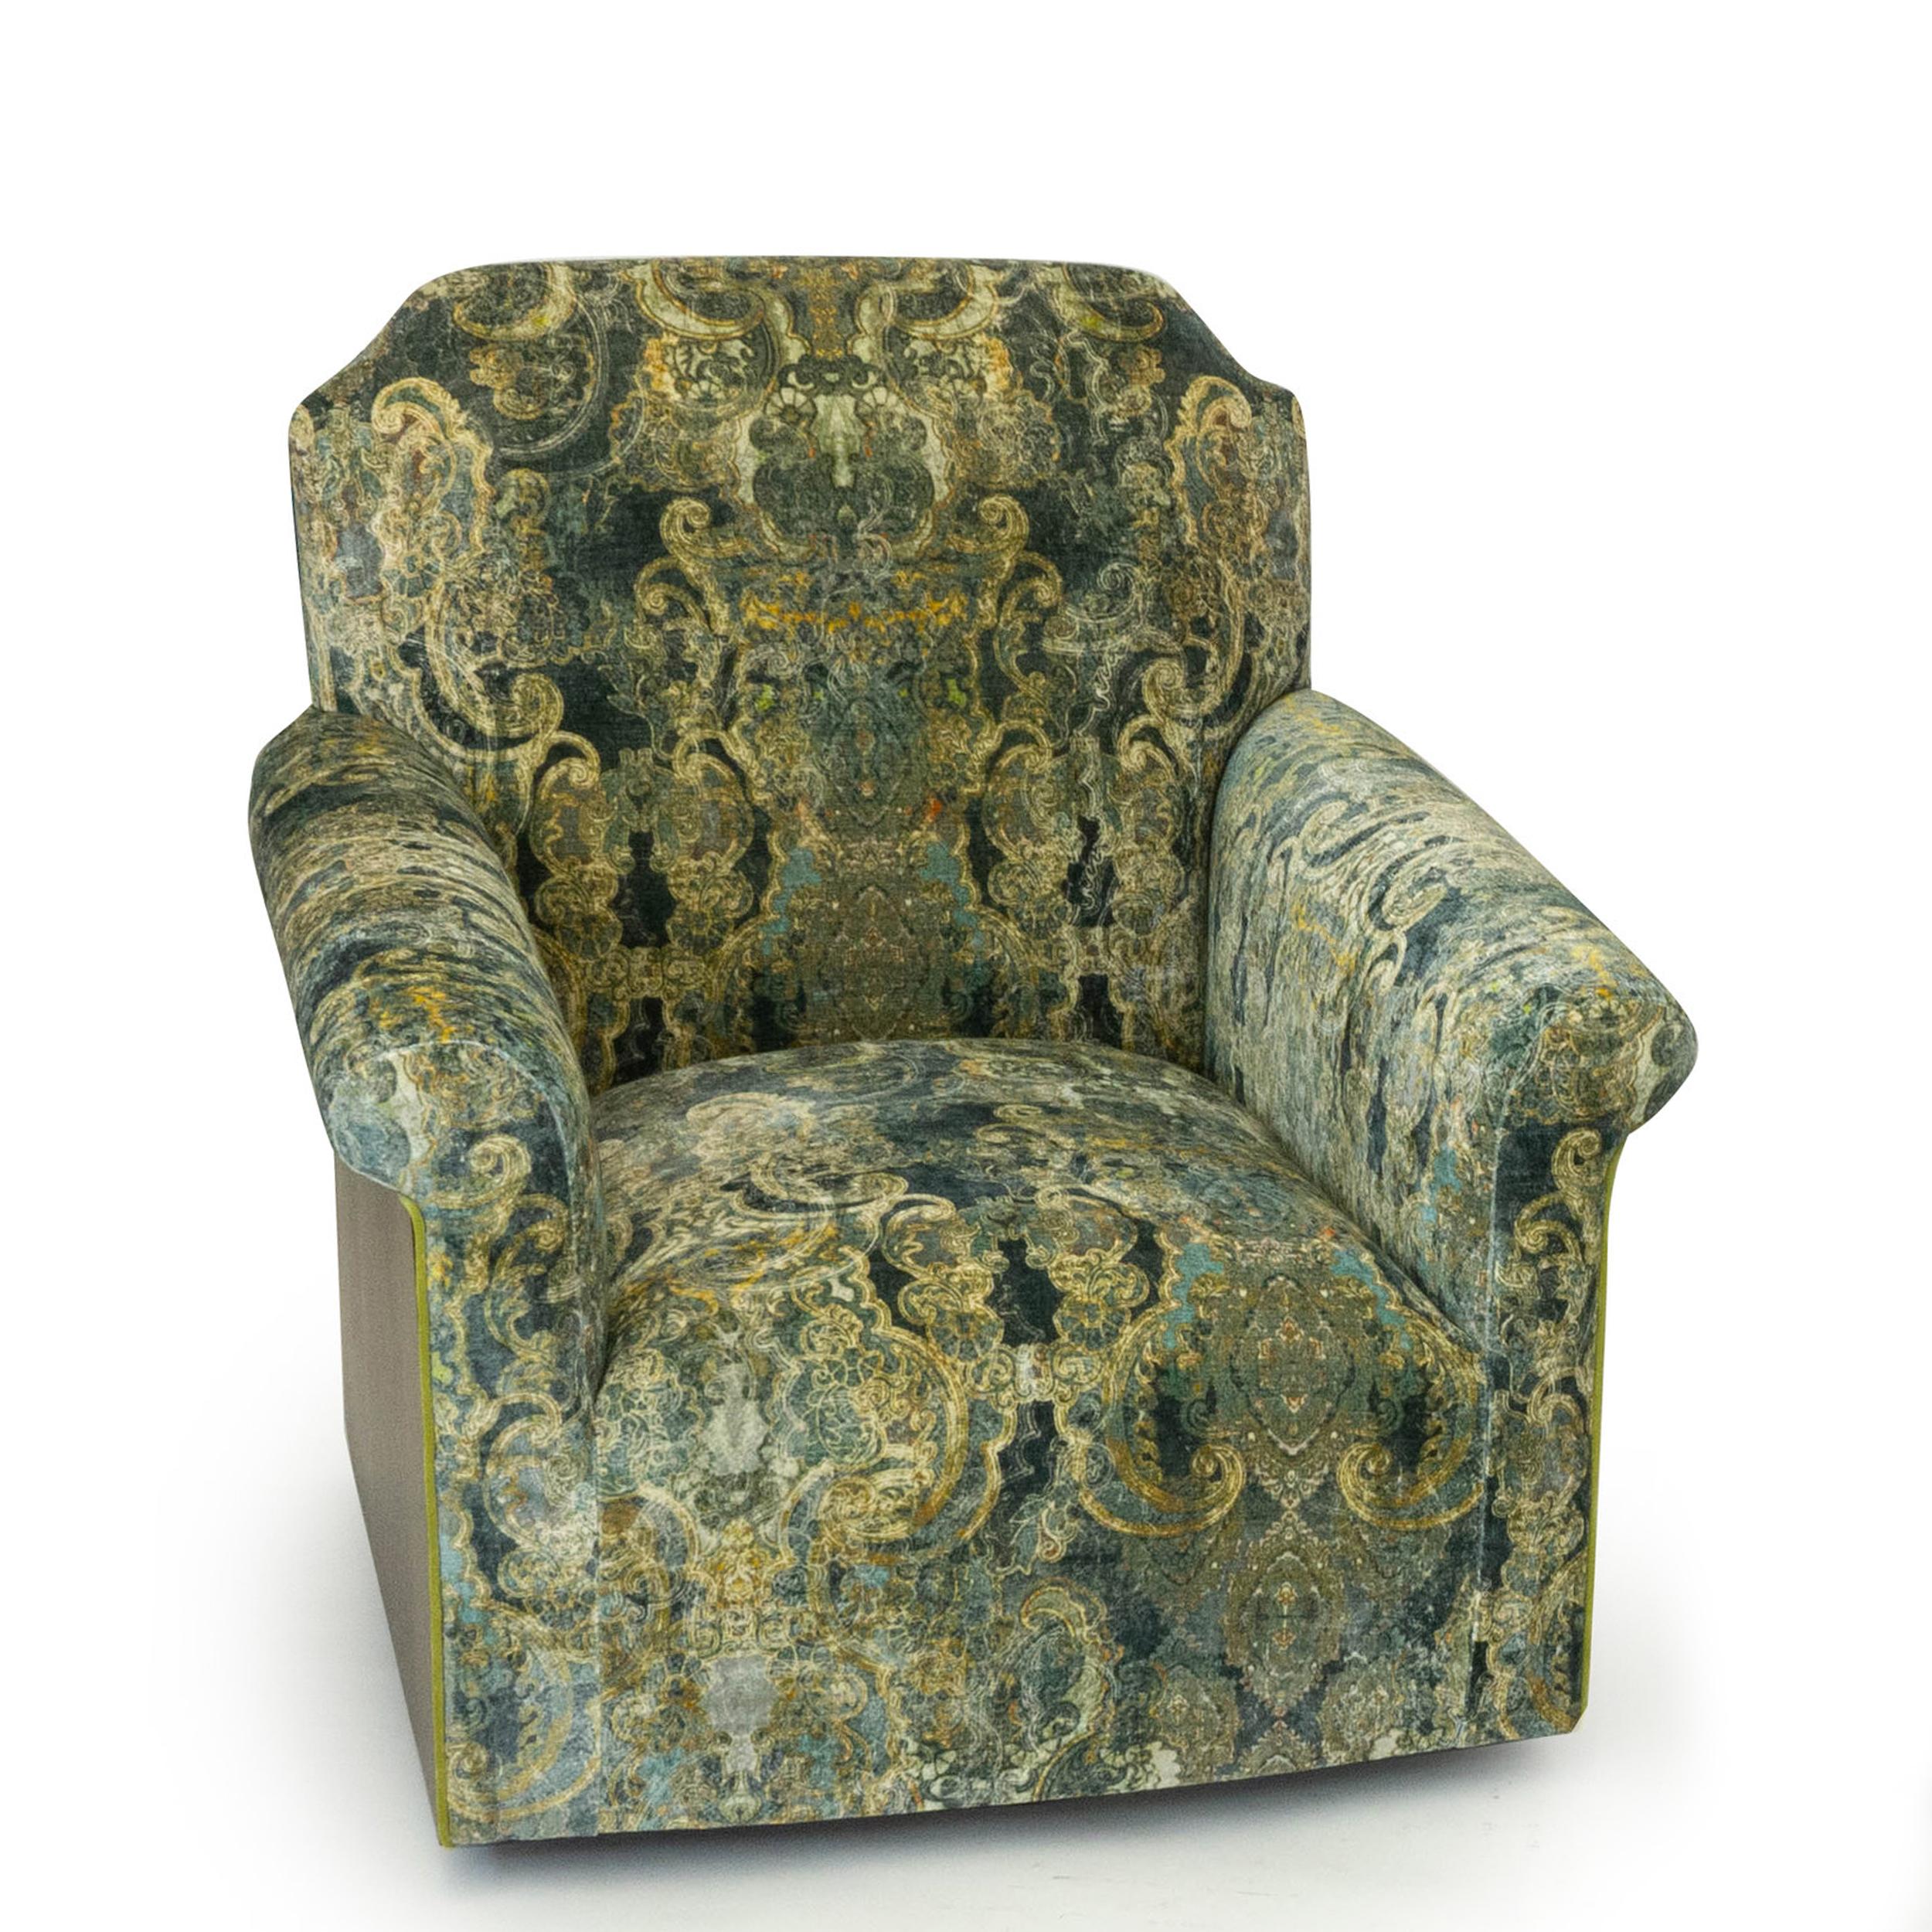 This is a new transitional swivel chair that rotates a full 360 degrees. The interior is upholstered in a velvet Damask print fabric while the outer back is covered with a walnut veneer. The solid maple frame with tight back and firm foam seat